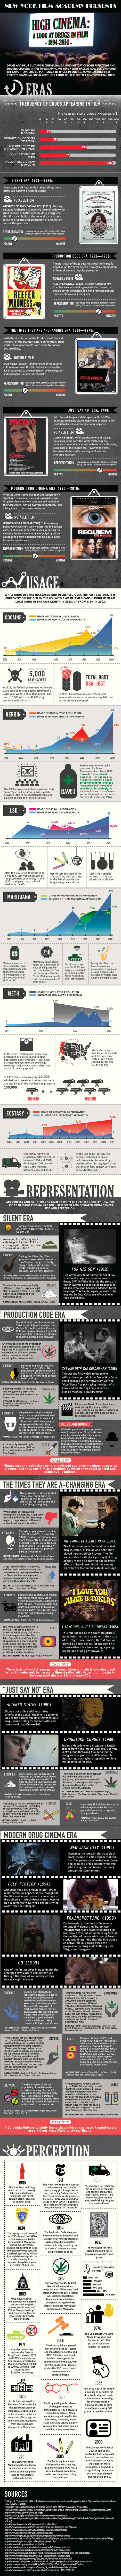 high-cinema-infographic_converted